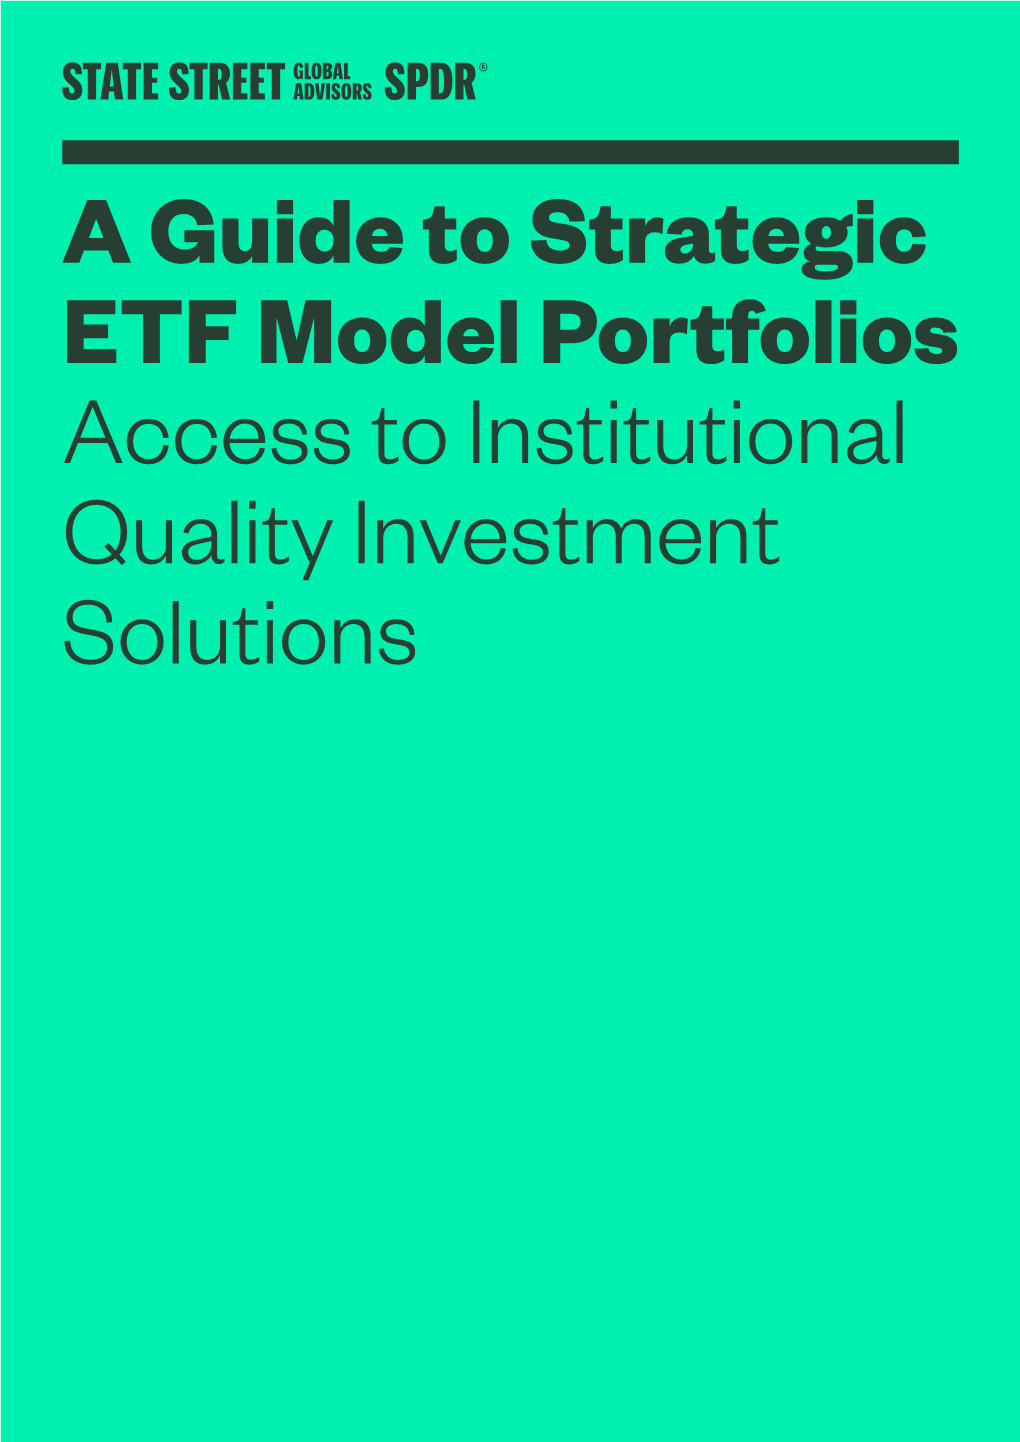 A Guide to Strategic ETF Model Portfolios Access to Institutional Quality Investment Solutions Working Together to Help You Create More Value for Your Clients